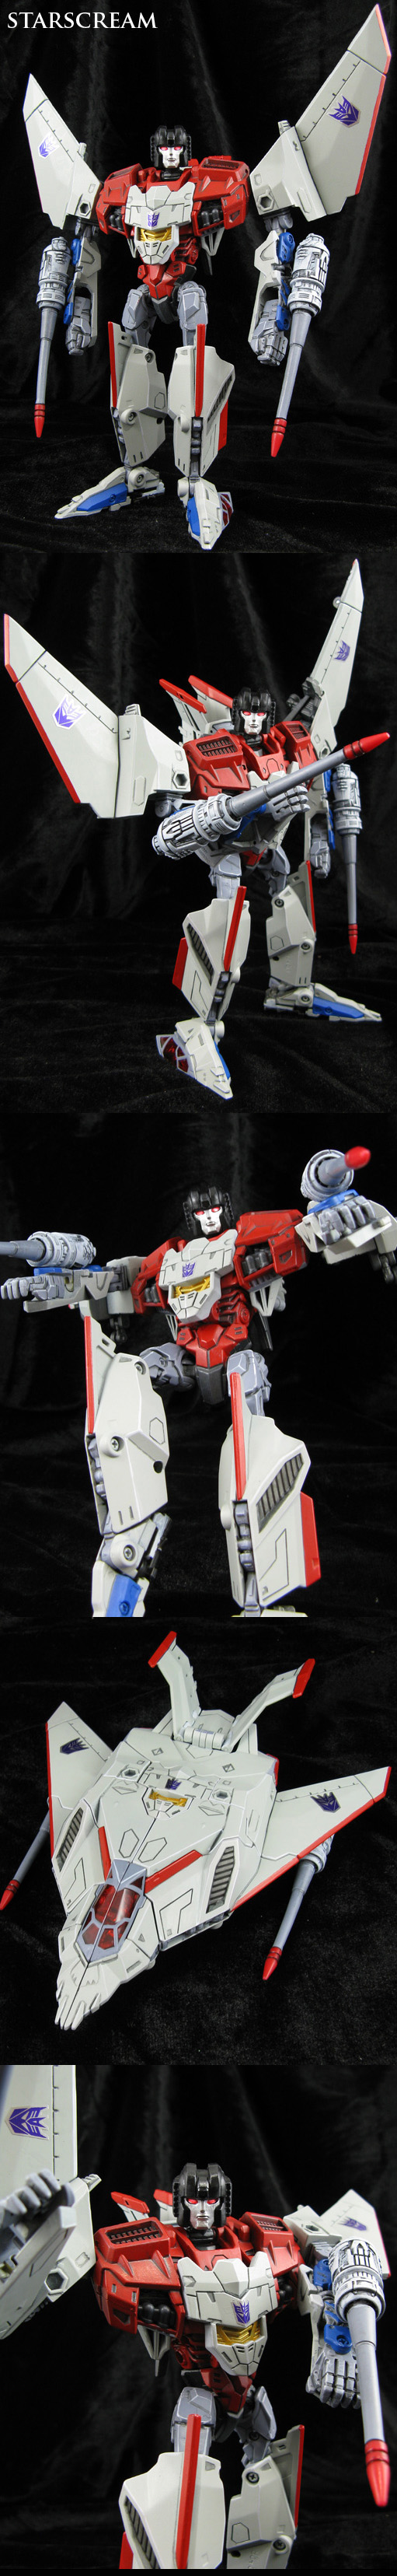 voyager_generations_starscream_figure_by_jin_saotome-d5nvyos.jpg